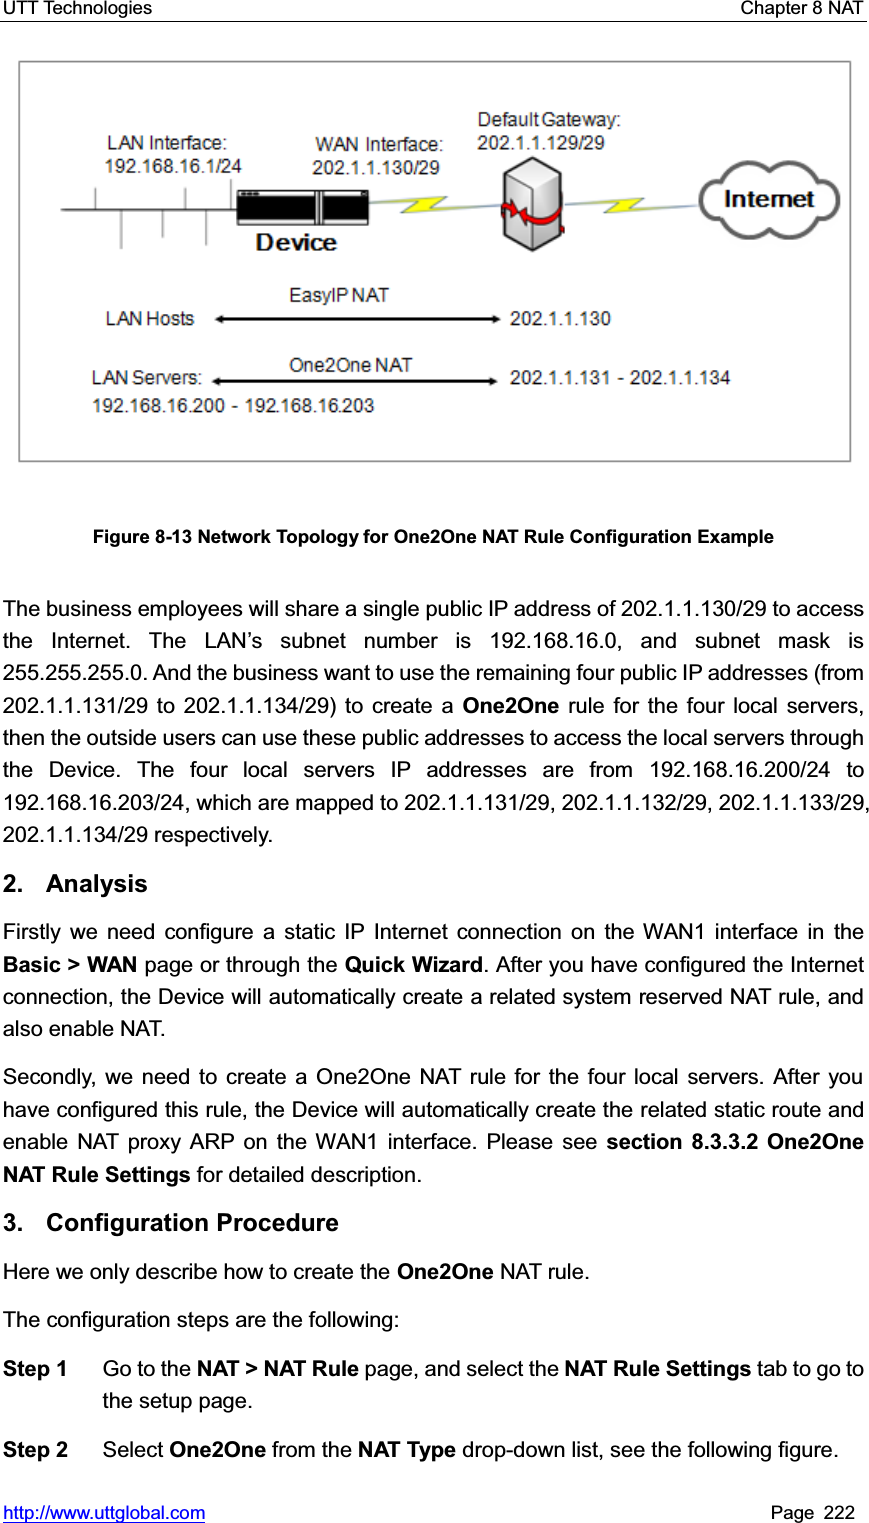 UTT Technologies    Chapter 8 NAT   http://www.uttglobal.com Page 222 Figure 8-13 Network Topology for One2One NAT Rule Configuration Example The business employees will share a single public IP address of 202.1.1.130/29 to access the Internet. The LAN¶s subnet number is 192.168.16.0, and subnet mask is 255.255.255.0. And the business want to use the remaining four public IP addresses (from 202.1.1.131/29 to 202.1.1.134/29) to create a One2One rule for the four local servers, then the outside users can use these public addresses to access the local servers through the Device. The four local servers IP addresses are from 192.168.16.200/24 to 192.168.16.203/24, which are mapped to 202.1.1.131/29, 202.1.1.132/29, 202.1.1.133/29, 202.1.1.134/29 respectively. 2. Analysis Firstly we need configure a static IP Internet connection on the WAN1 interface in theBasic &gt; WAN page or through the Quick Wizard. After you have configured the Internet connection, the Device will automatically create a related system reserved NAT rule, and also enable NAT. Secondly, we need to create a One2One NAT rule for the four local servers. After you have configured this rule, the Device will automatically create the related static route and enable NAT proxy ARP on the WAN1 interface. Please see section 8.3.3.2 One2One NAT Rule Settings for detailed description. 3. Configuration Procedure Here we only describe how to create the One2One NAT rule.   The configuration steps are the following:   Step 1  Go to the NAT &gt; NAT Rule page, and select the NAT Rule Settings tab to go to the setup page. Step 2  Select One2One from the NAT Type drop-down list, see the following figure. 